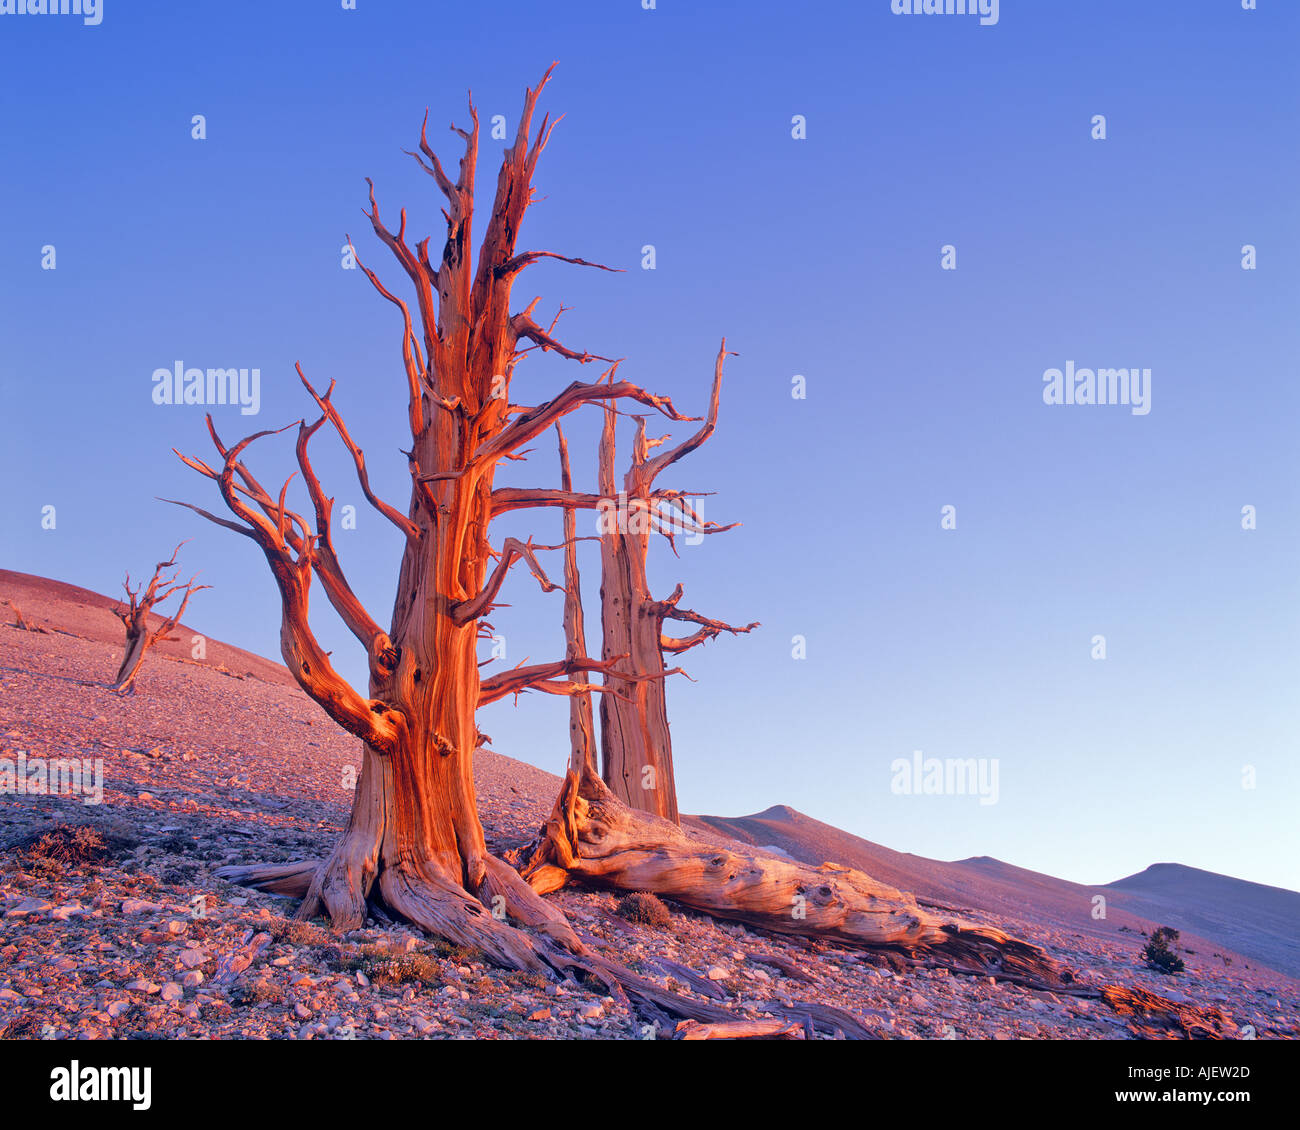 Bristlecone pine and White Mountains Ancient Bristlecone Pine Forest Patriarch Grove Inyo National Forest California USA Stock Photo